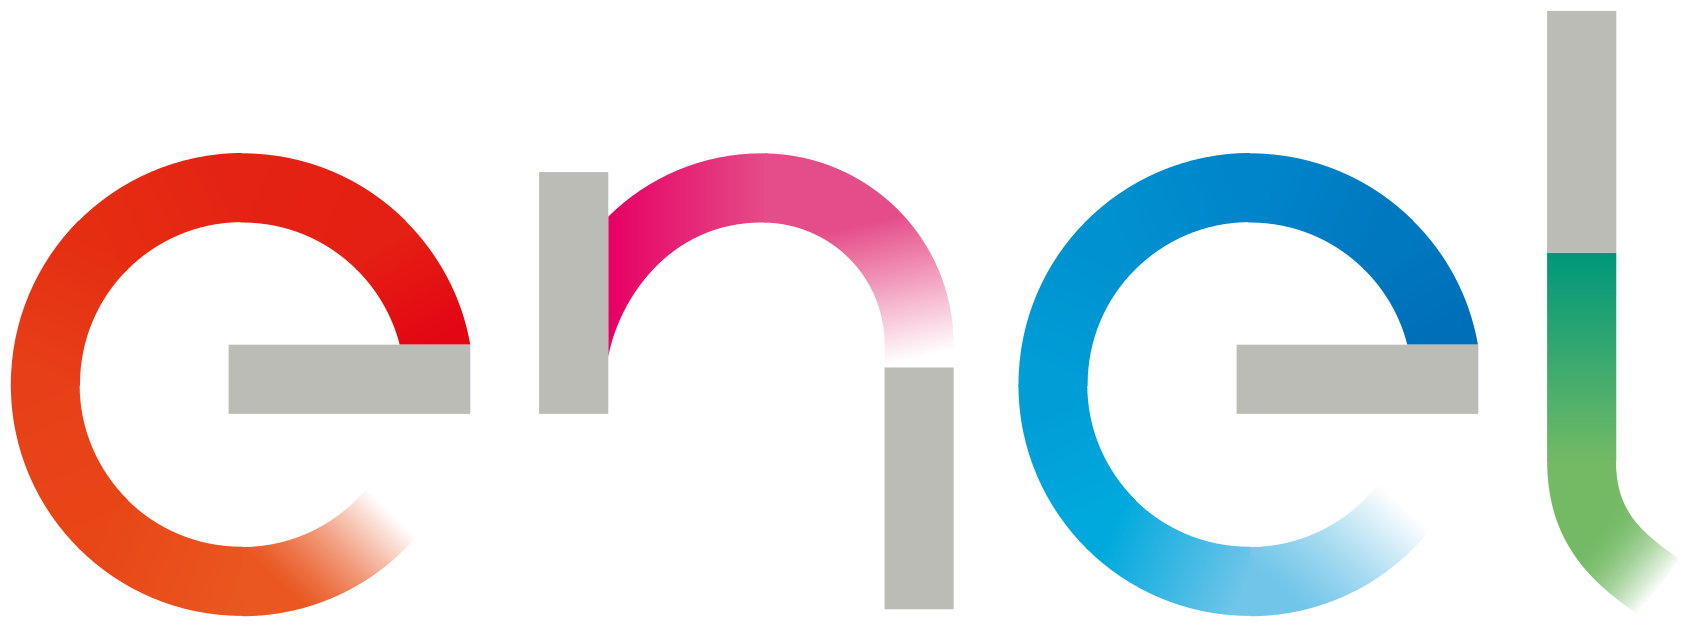 Enel – OD Manager